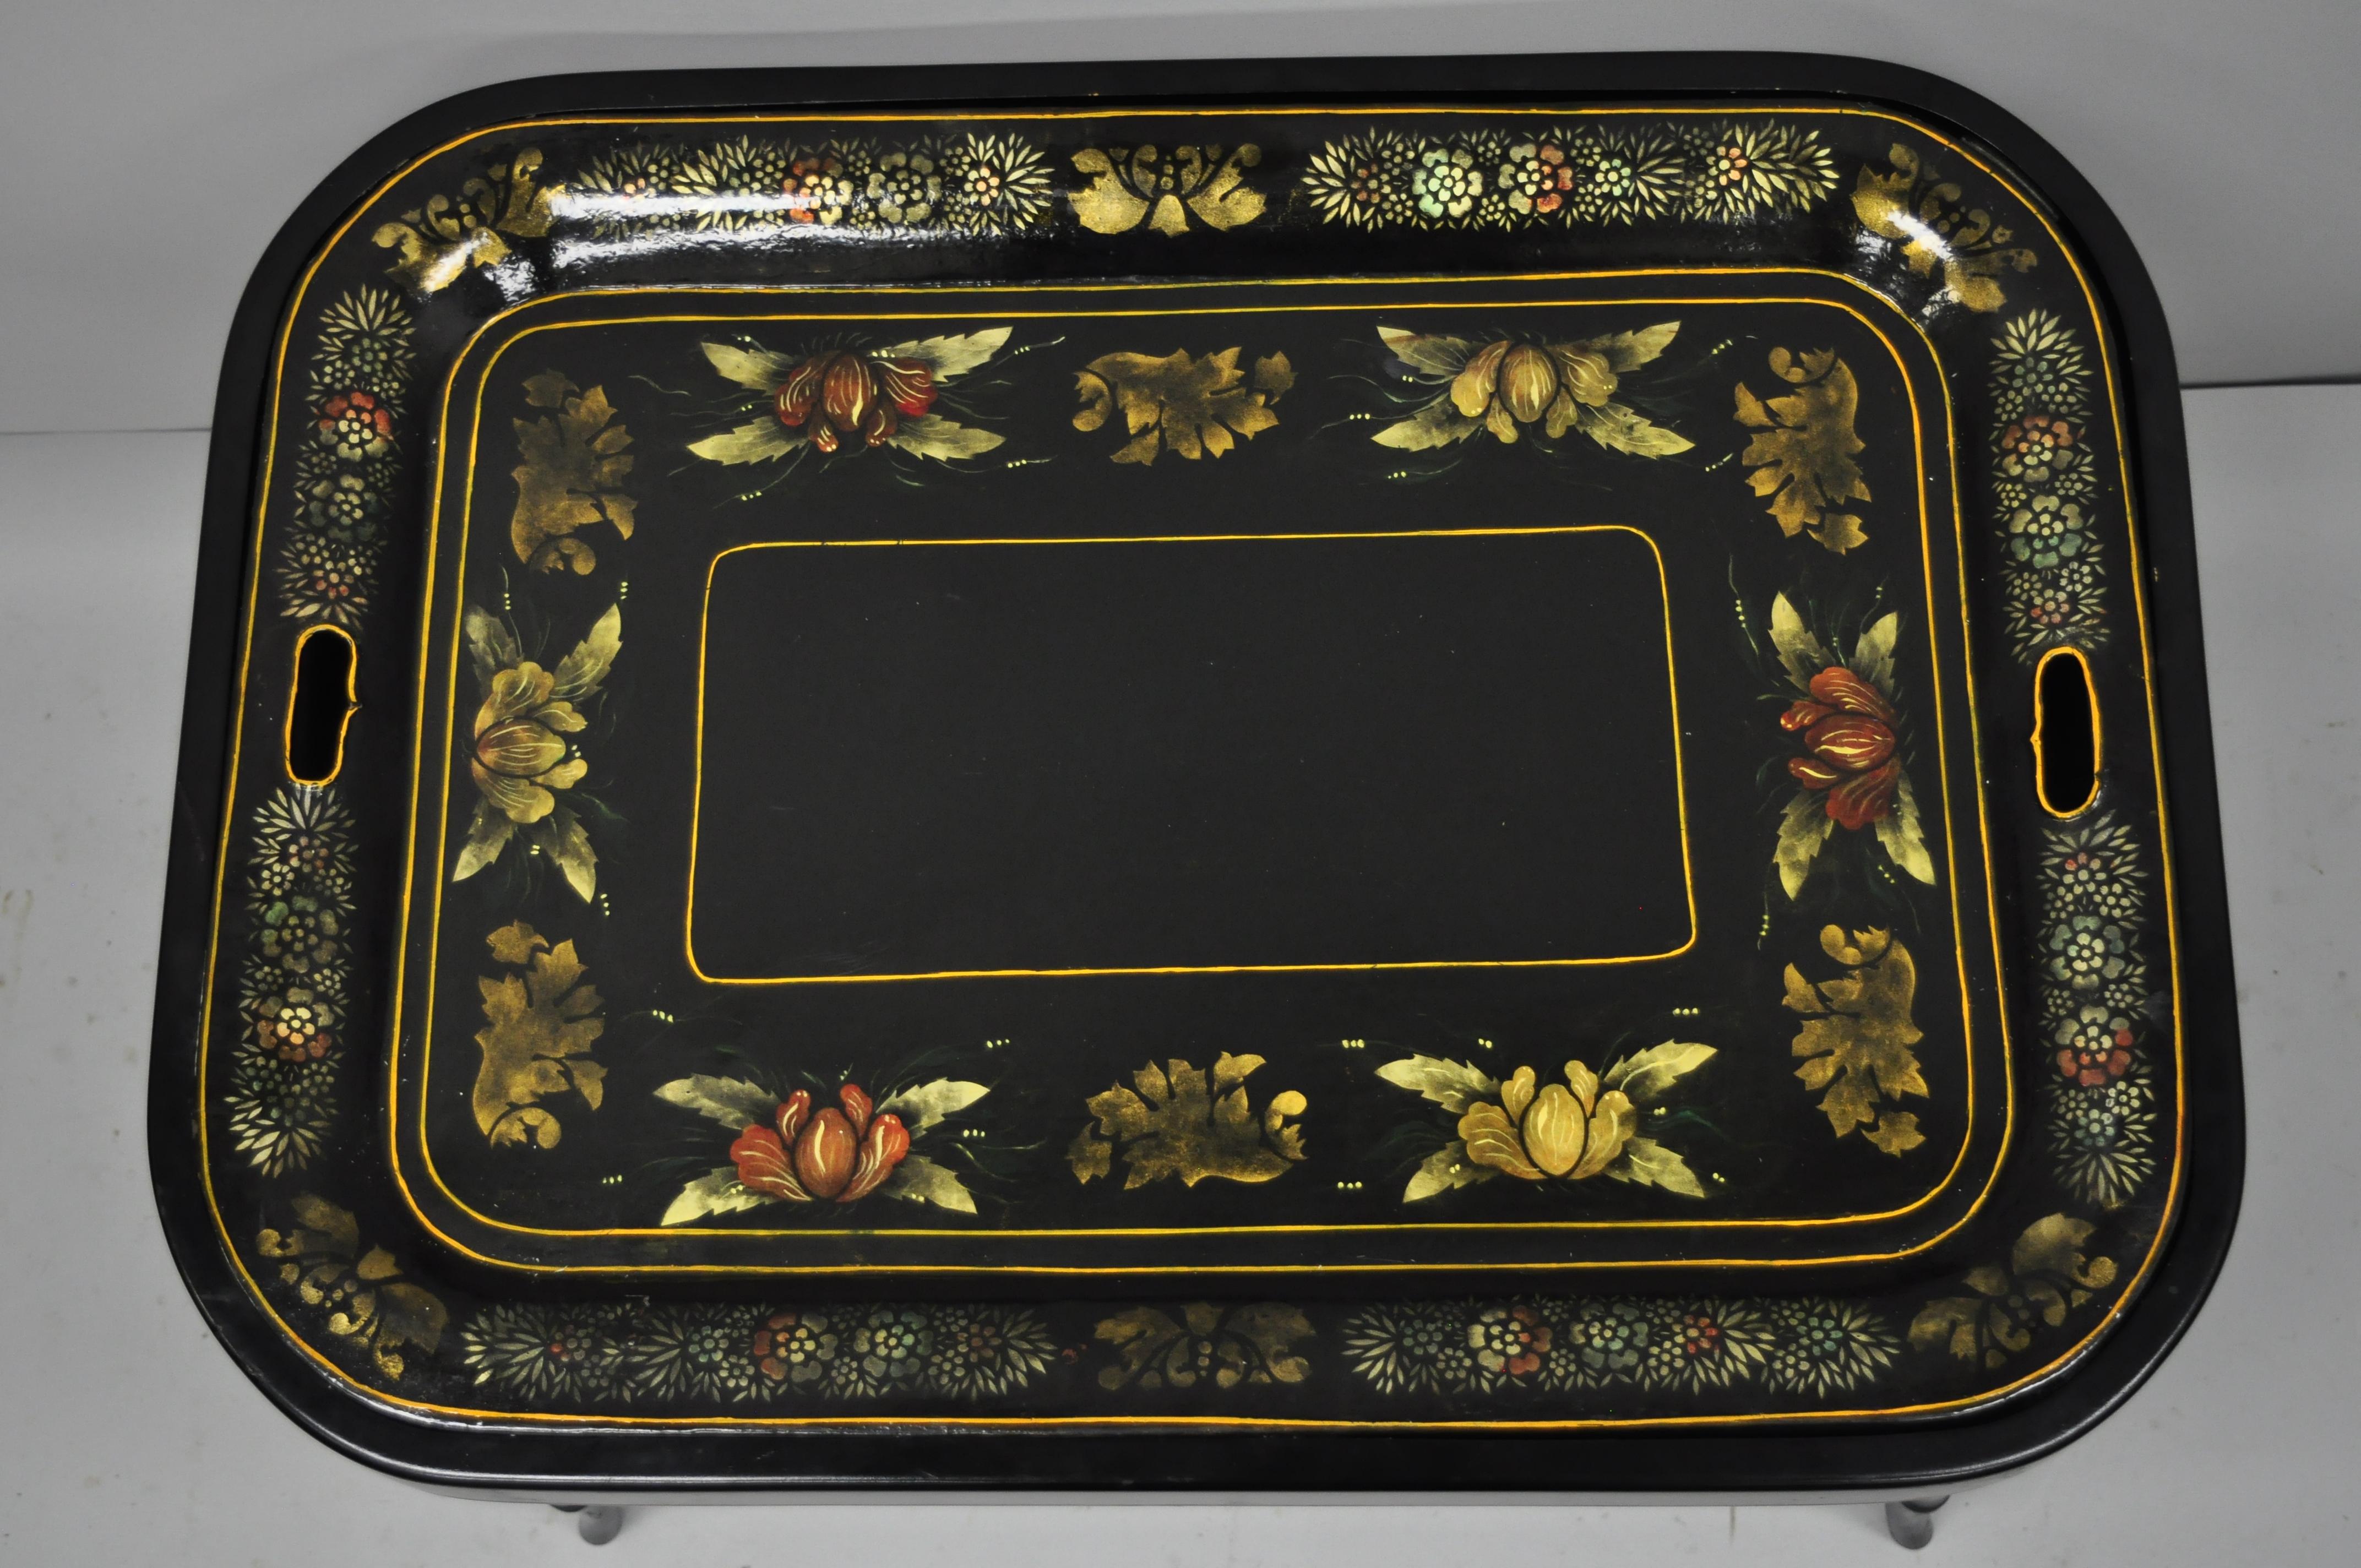 19th century tole metal serving tray with black faux bamboo coffee table base. Item features tray, circa 1850, custom base circa late 20th century. Tray signed to underside 